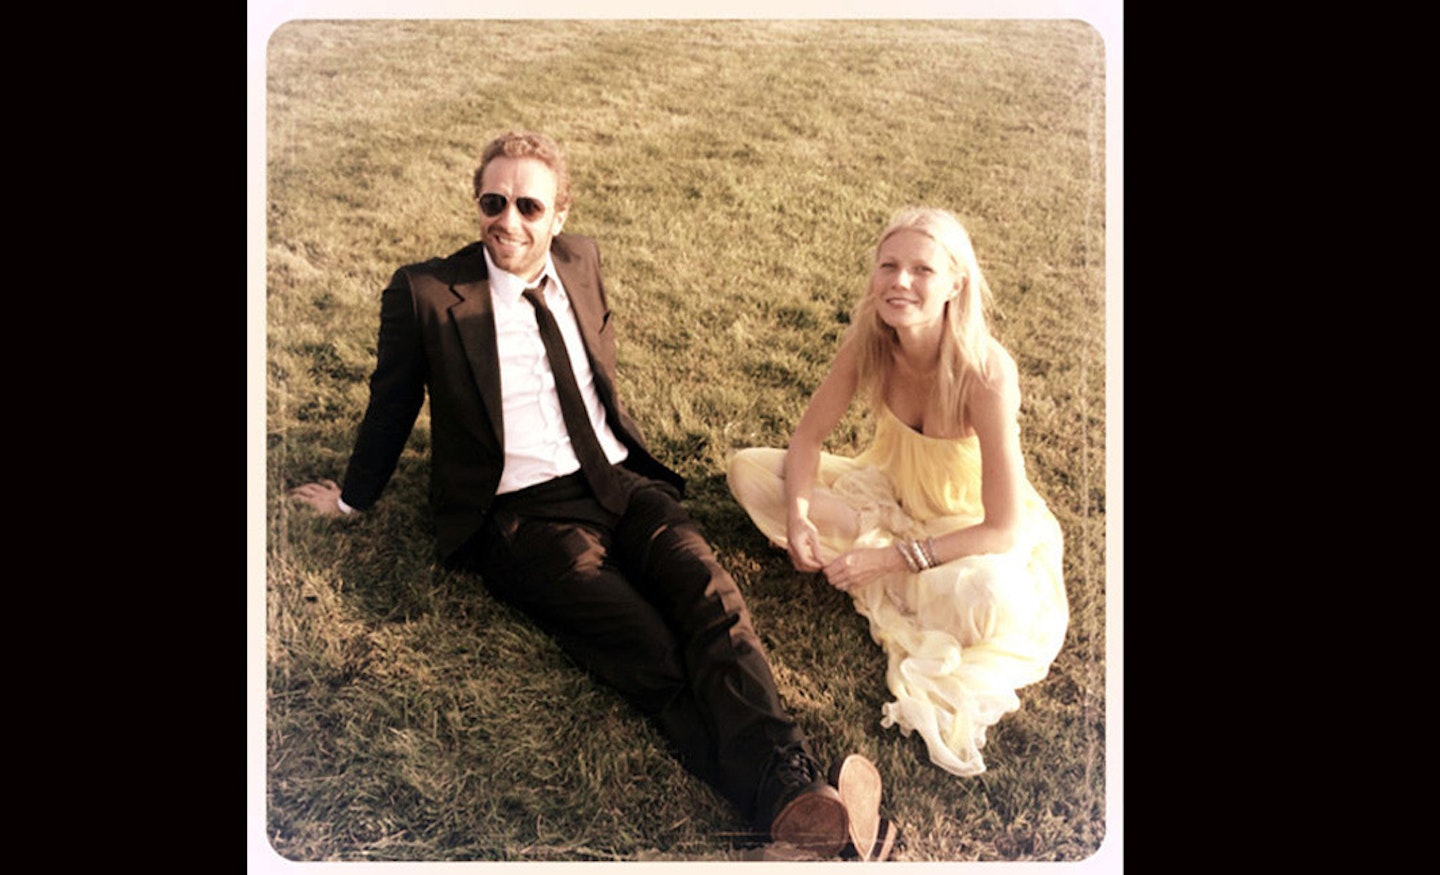 _Gwyneth-Paltrow-And-Chris-Martin-Are-Divorcing-After-10-Years-Of-Marriage--1_1